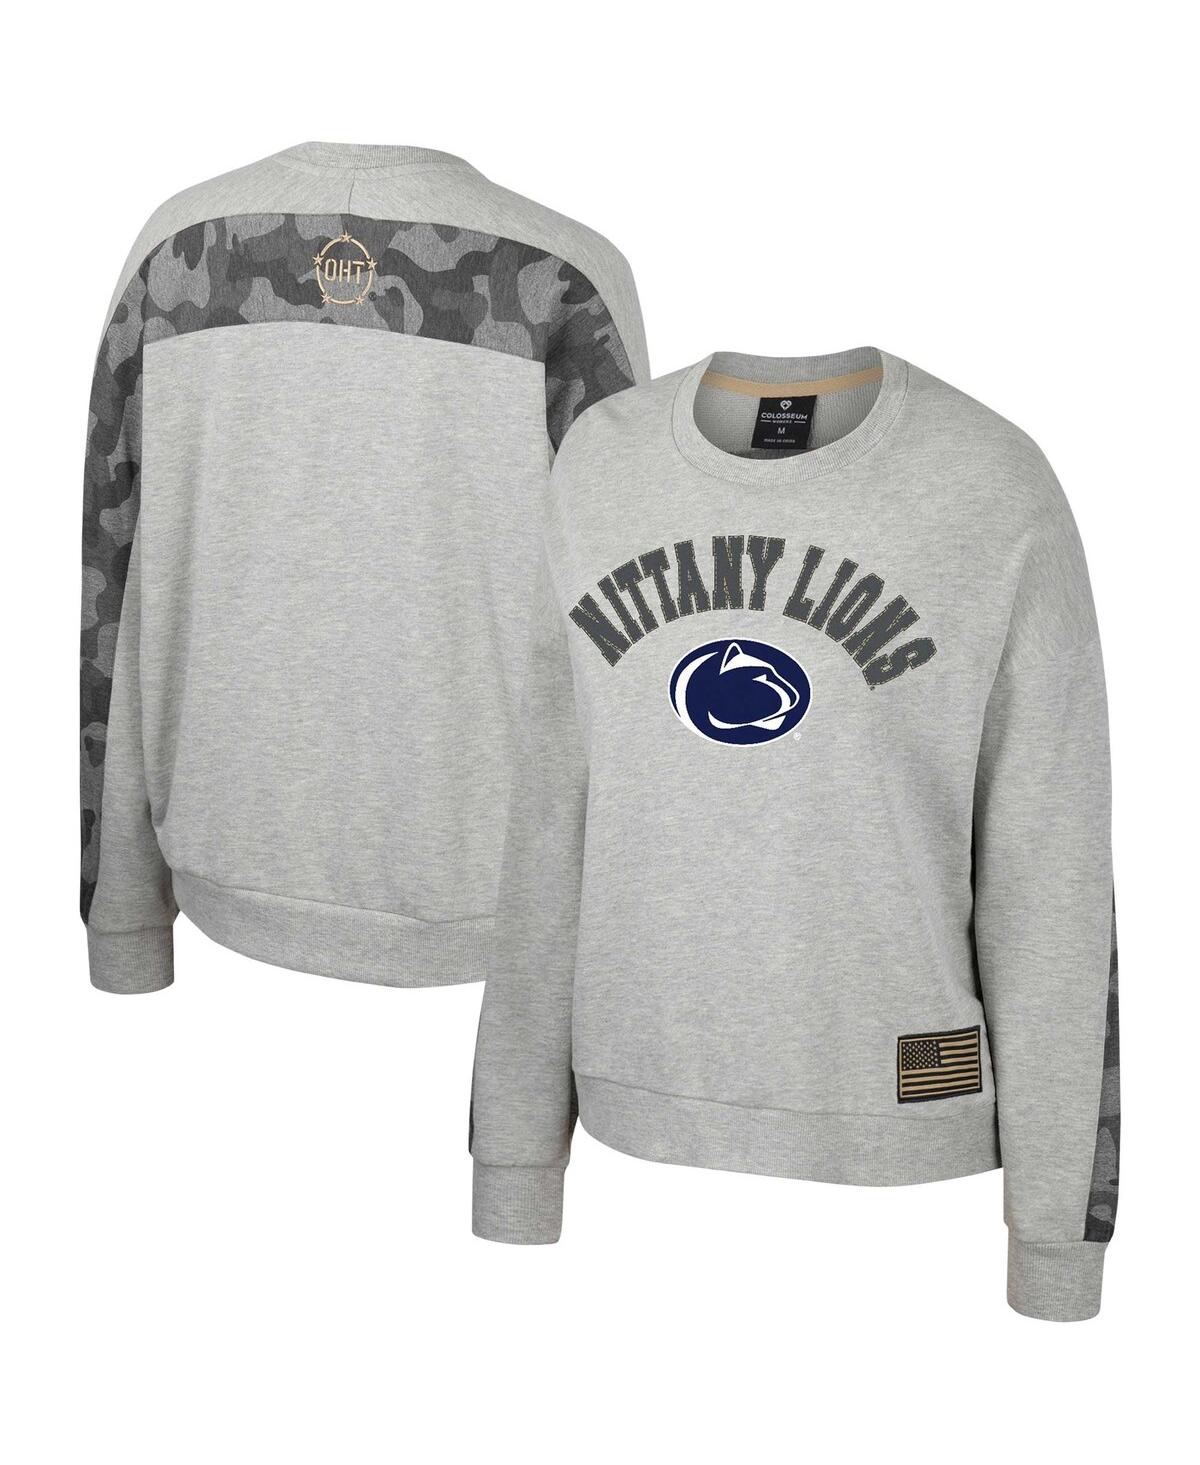 Women's Colosseum Heather Gray Penn State Nittany Lions Oht Military-Inspired Appreciation Flag Rank Dolman Pullover Sweatshirt - Heather Gray